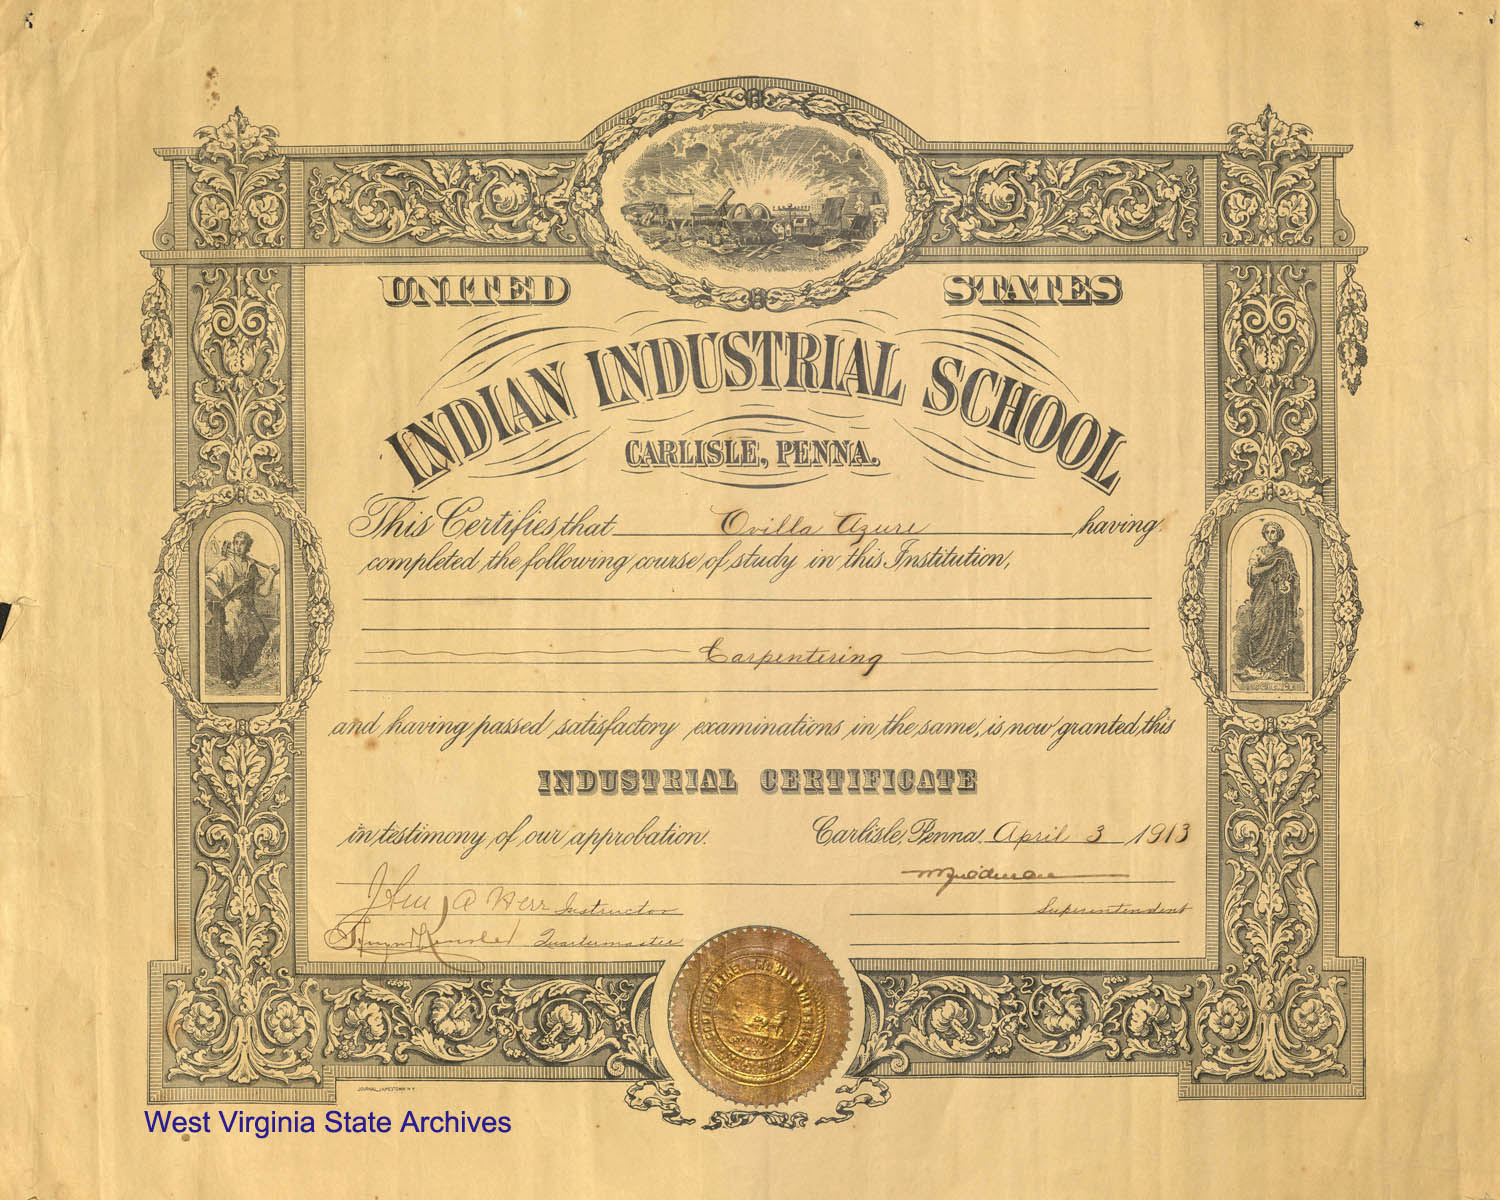 Ovilla Azures industrial certificate from the Indian Industrial School, Carlisle, Pennsylvania, 1913. Jim Thorpe attended this institution prior to rising to fame in the 1912 Olympics. (Ms91-34)